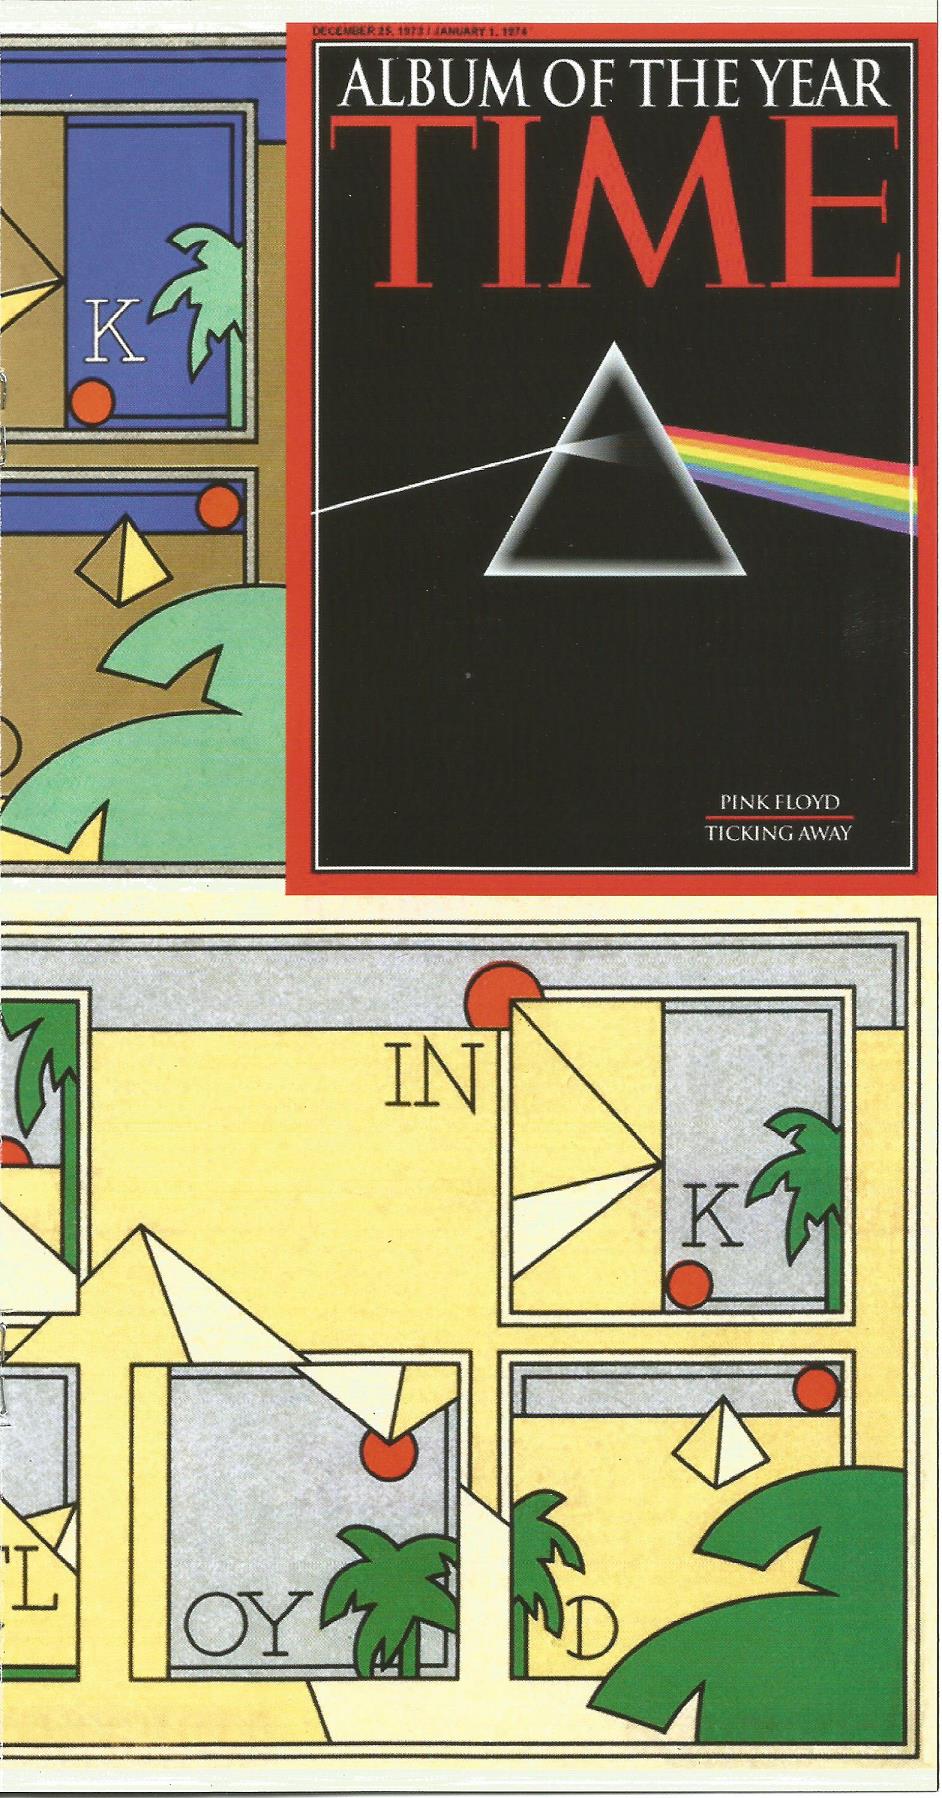 TГ©lГ©charger un fichier Pink Floyd - The Dark Side Of The Moon (2011) [Hi-Res stereo].zip (870,81 Mb) In free mode | Turbobit.net